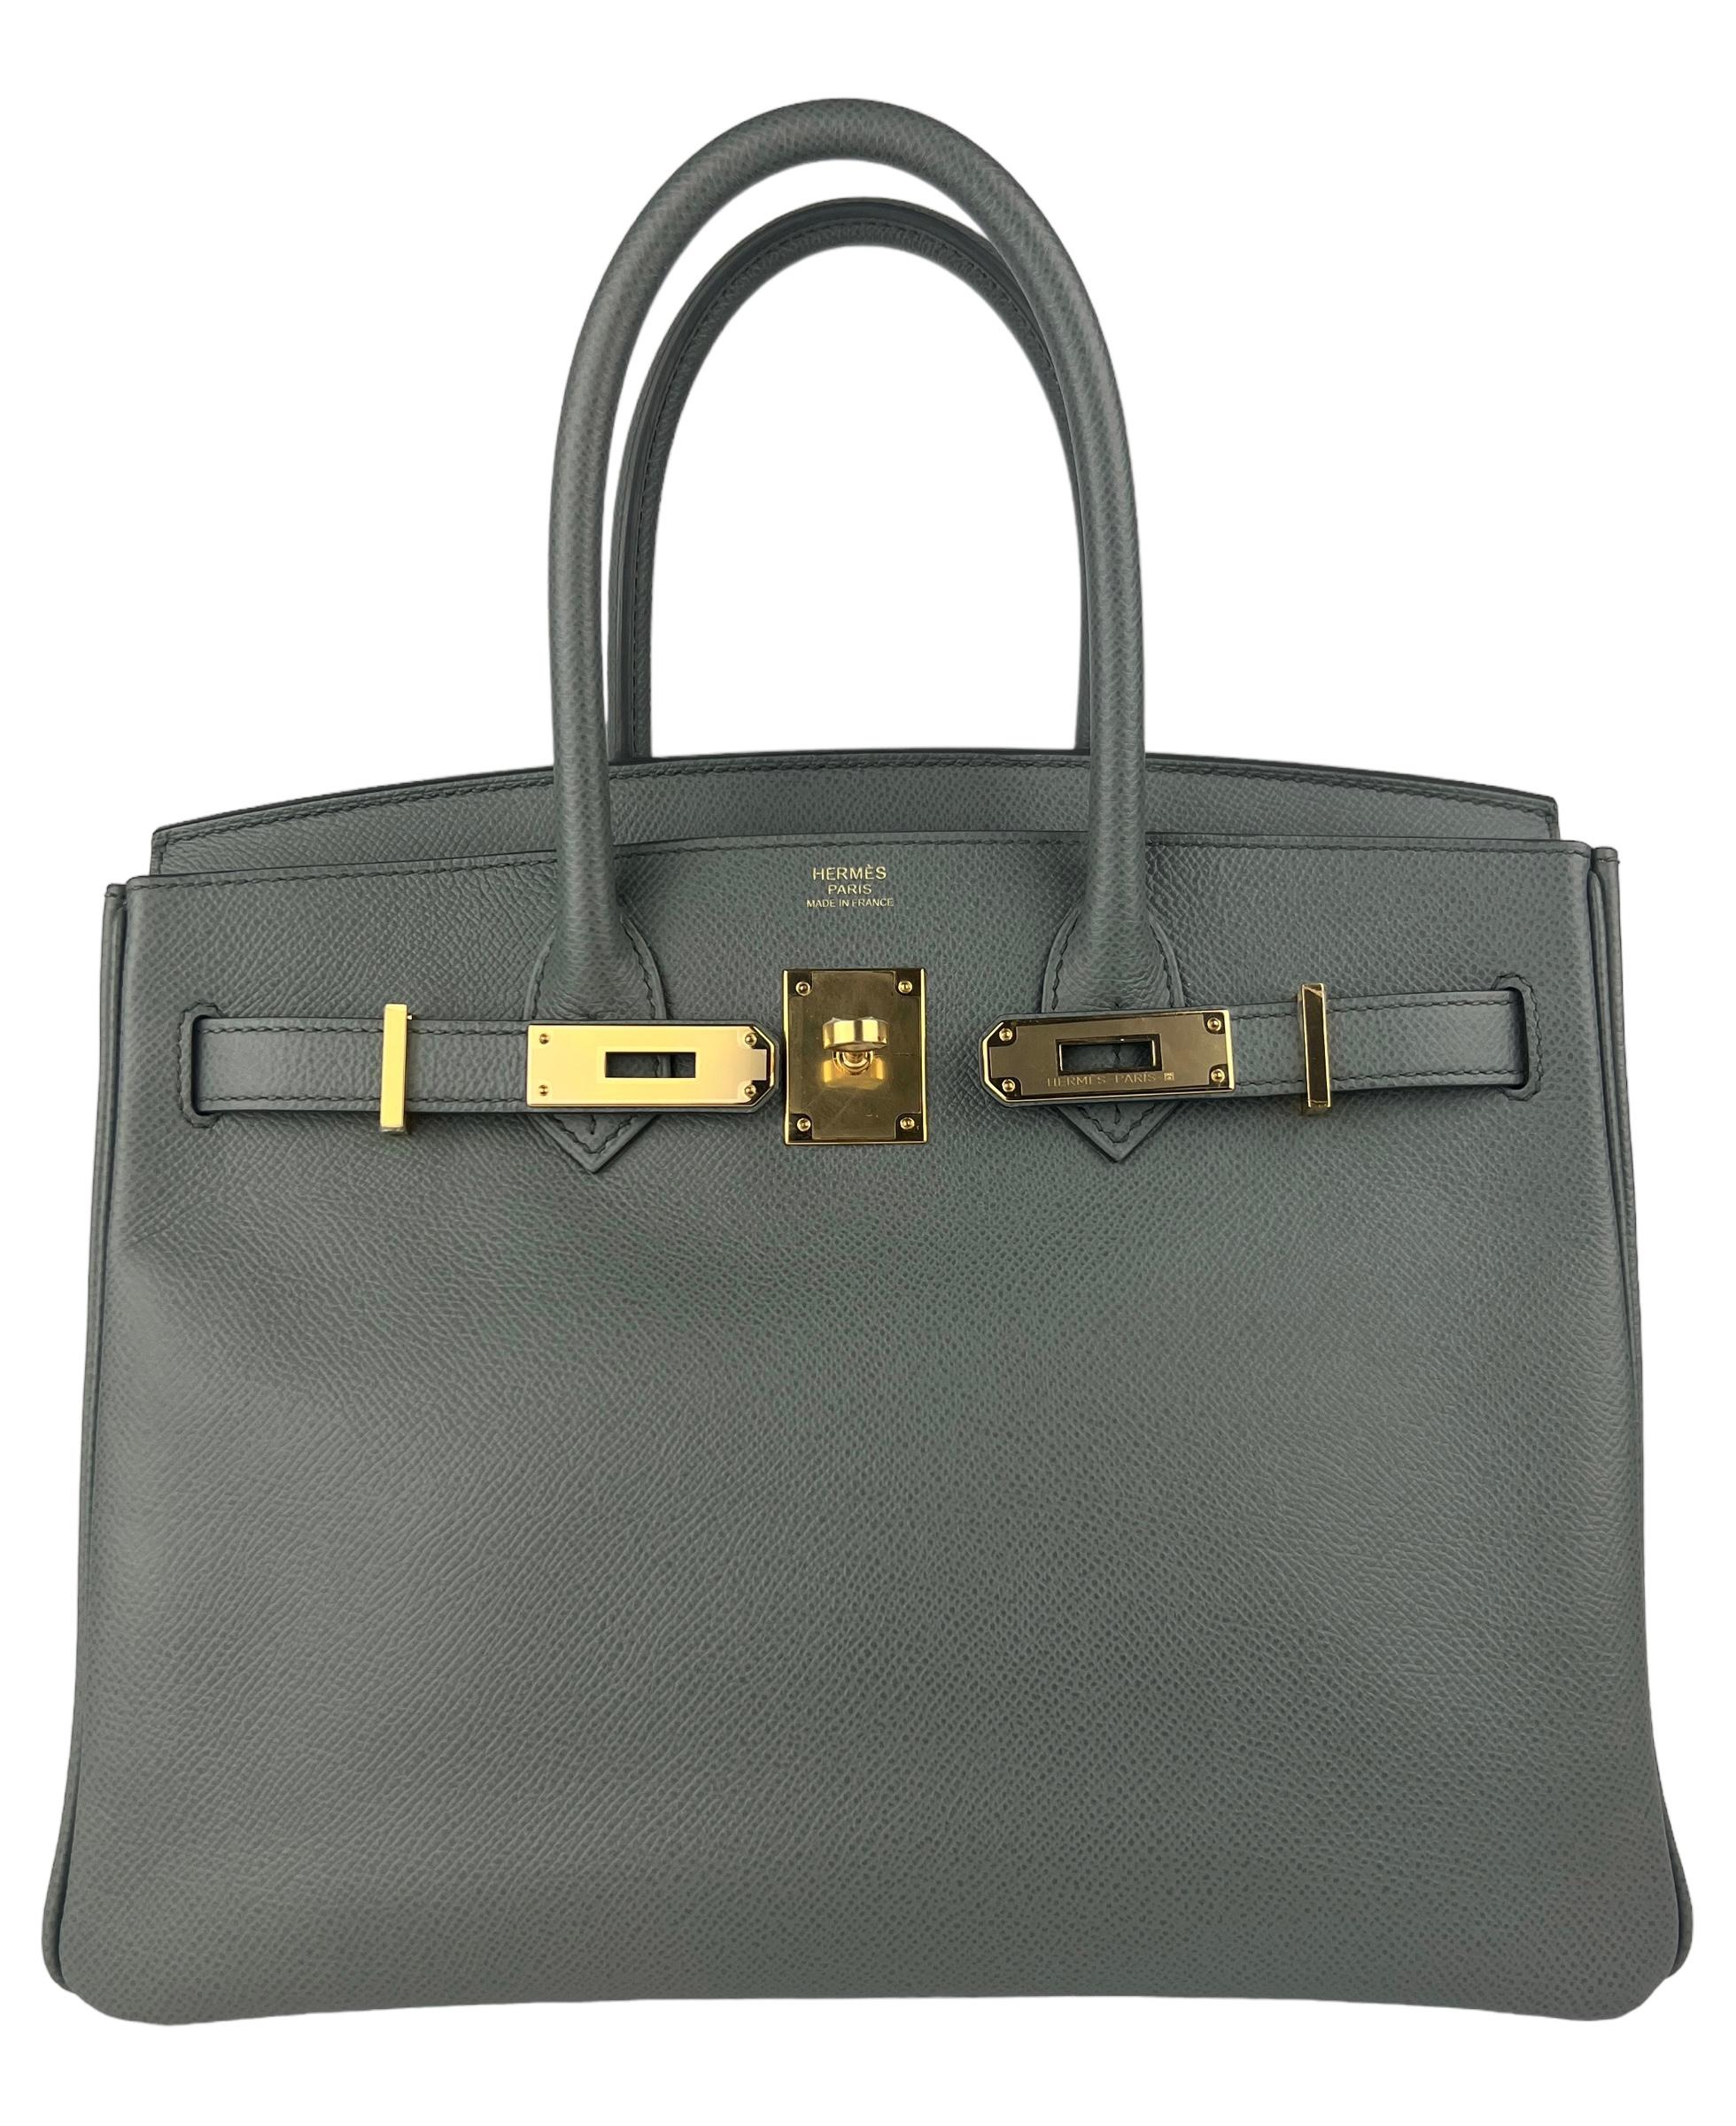 Hermes Birkin 30 Vert Amande Epsom Leather Gold Hardware Green Gray 2021 In Excellent Condition For Sale In Miami, FL